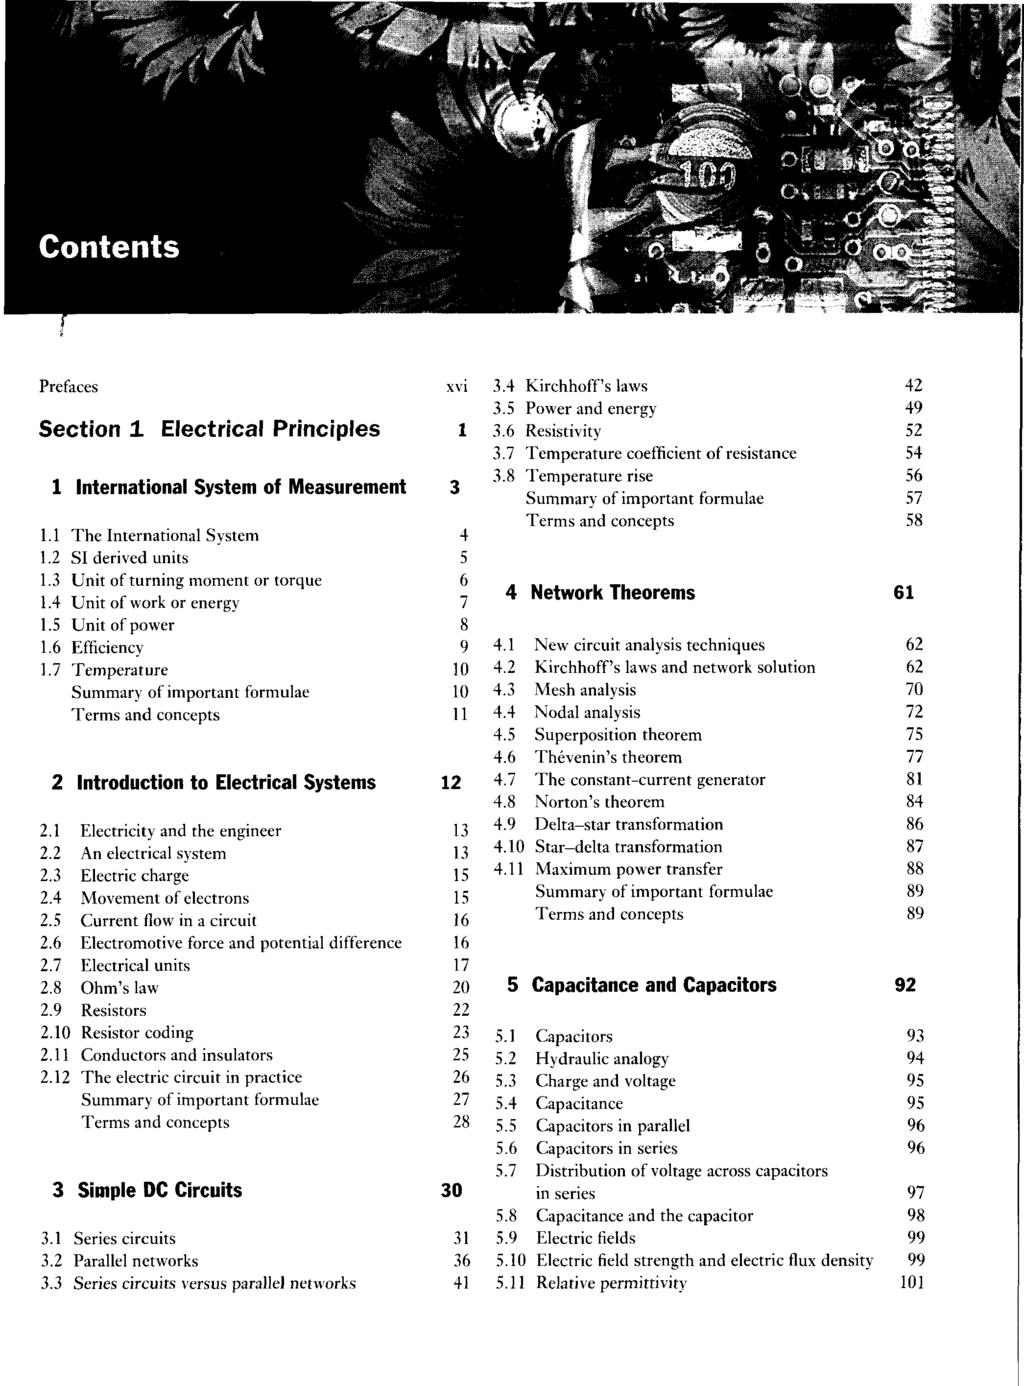 Contents Prefaces Section 1 Electrical Principles 1 International System of Measurement 1.1 The International System 1.2 SI derived units 1.3 Unit of turning moment or torque 1.